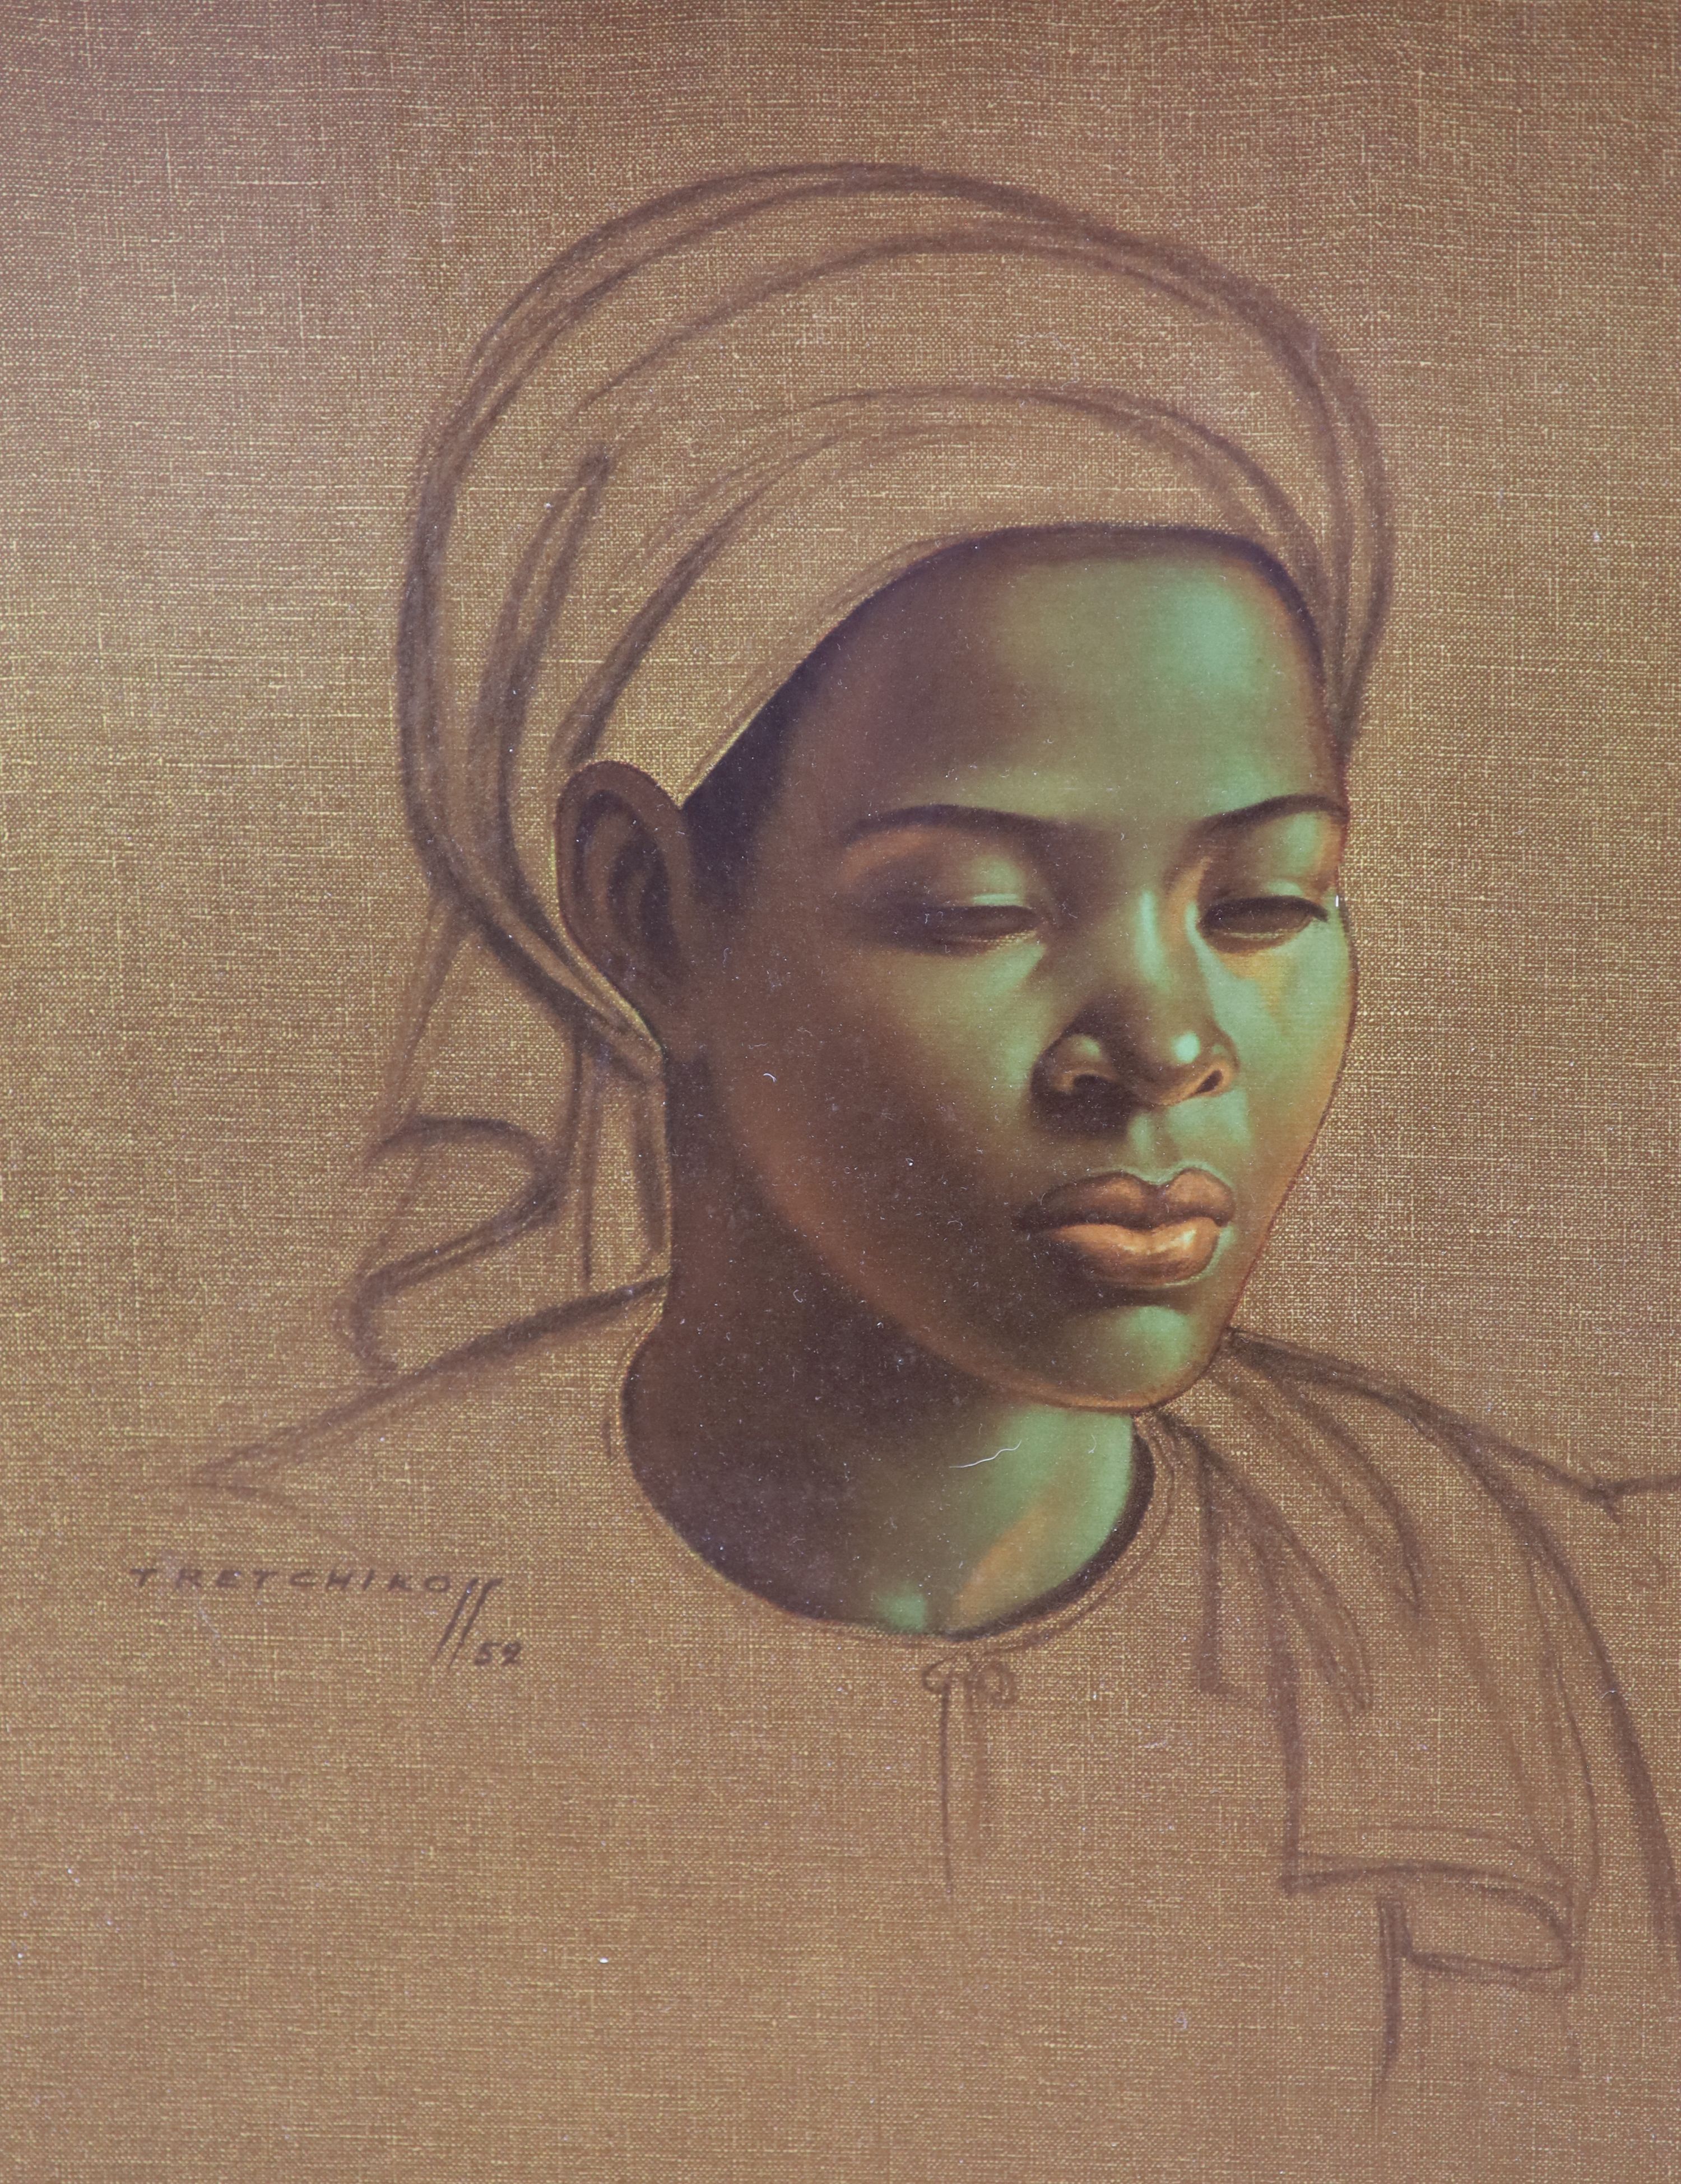 After Vladimir Tretchikoff (Russian, 1913-2006), pair of colour prints, Portraits of African women, 60 x 50cm